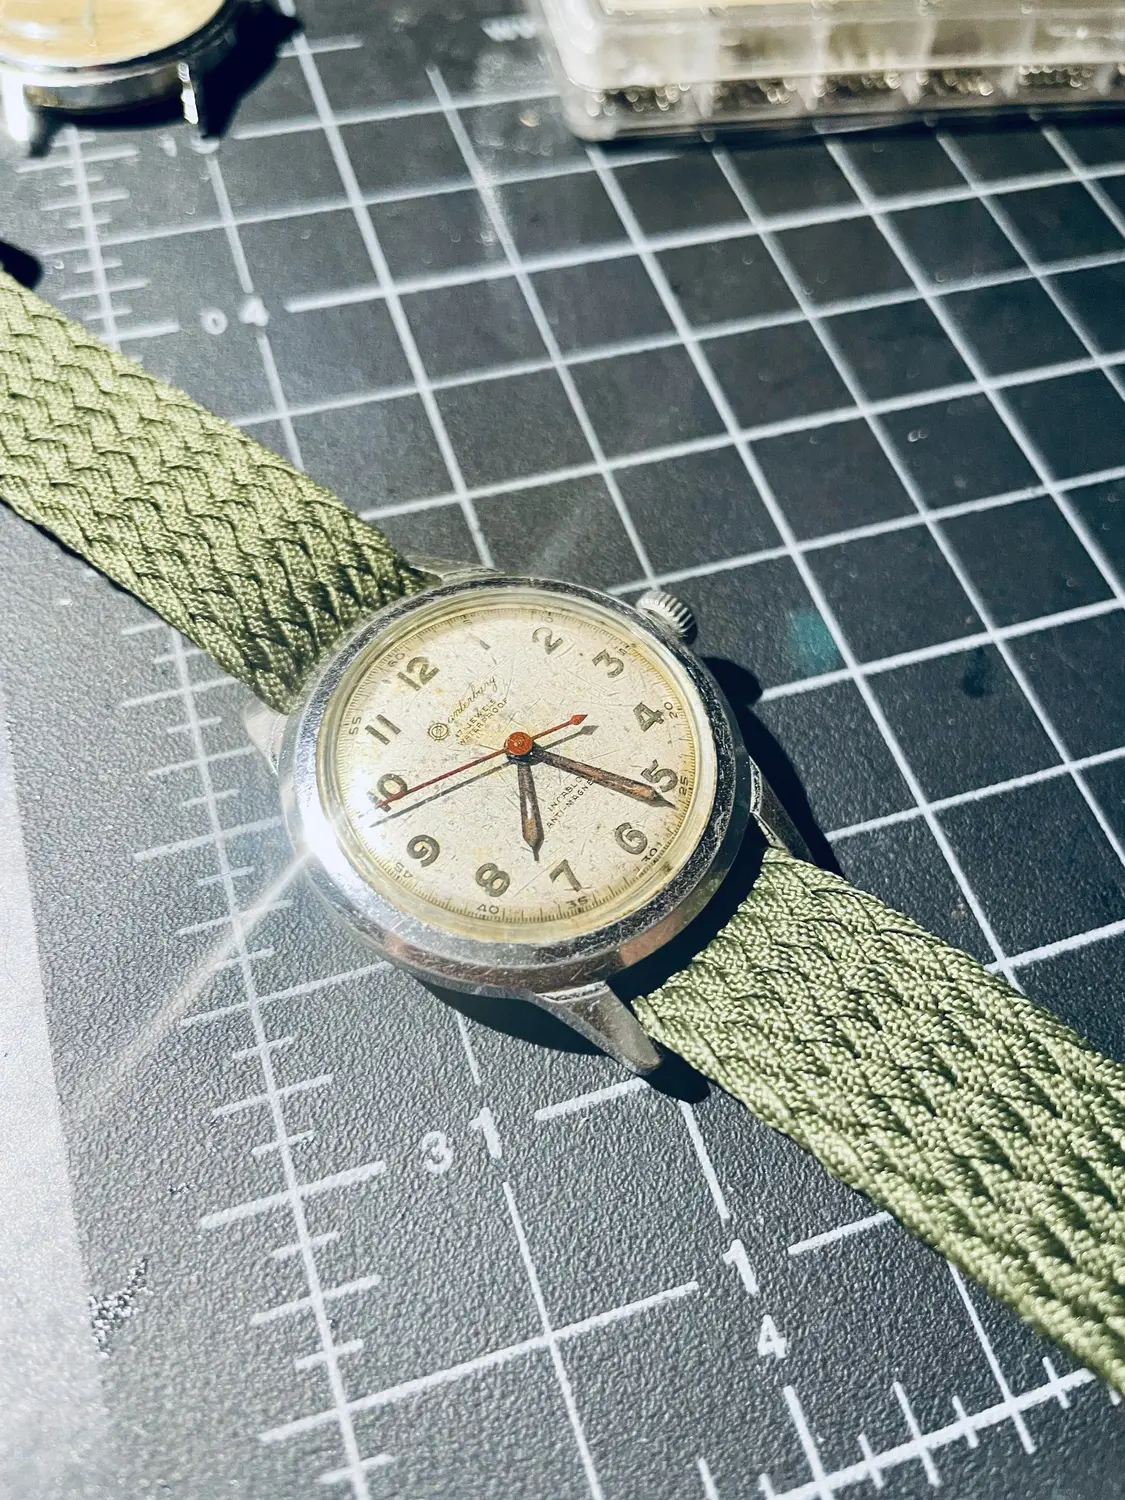 A watch from 1952, I was able to clean the inner workings and restore it. Totally mechanical, too.